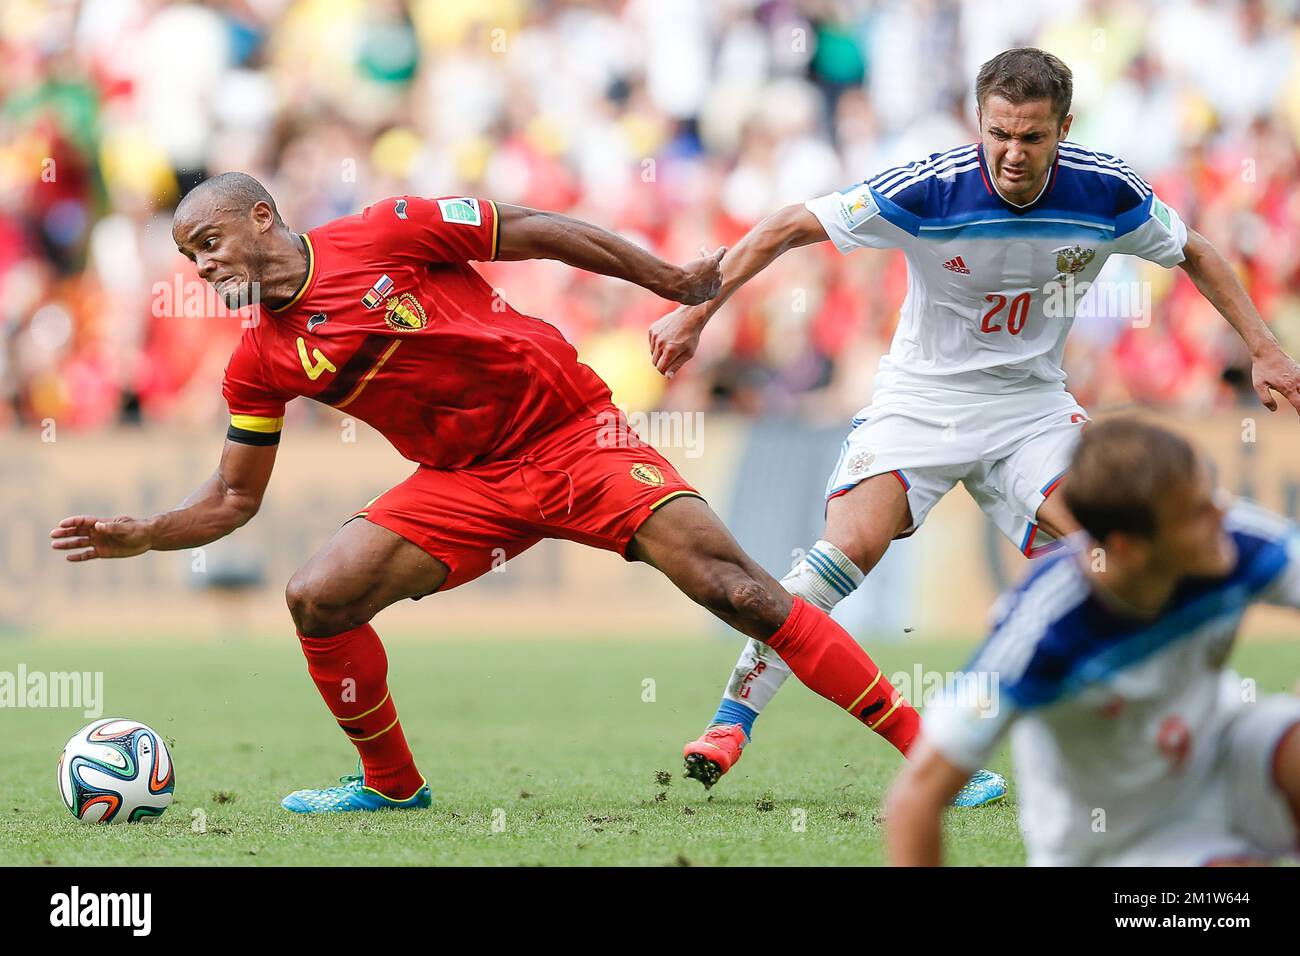 20140622 - RIO DE JANEIRO, BRAZIL: Belgium's captain Vincent Kompany and Russia's Viktor Fayzulin in action during a soccer game between Belgian national team The Red Devils and Russia in Rio de Janeiro, Brazil, the second game in Group H of the first round of the 2014 FIFA World Cup, Sunday 22 June 2014. BELGA PHOTO BRUNO FAHY Stock Photo